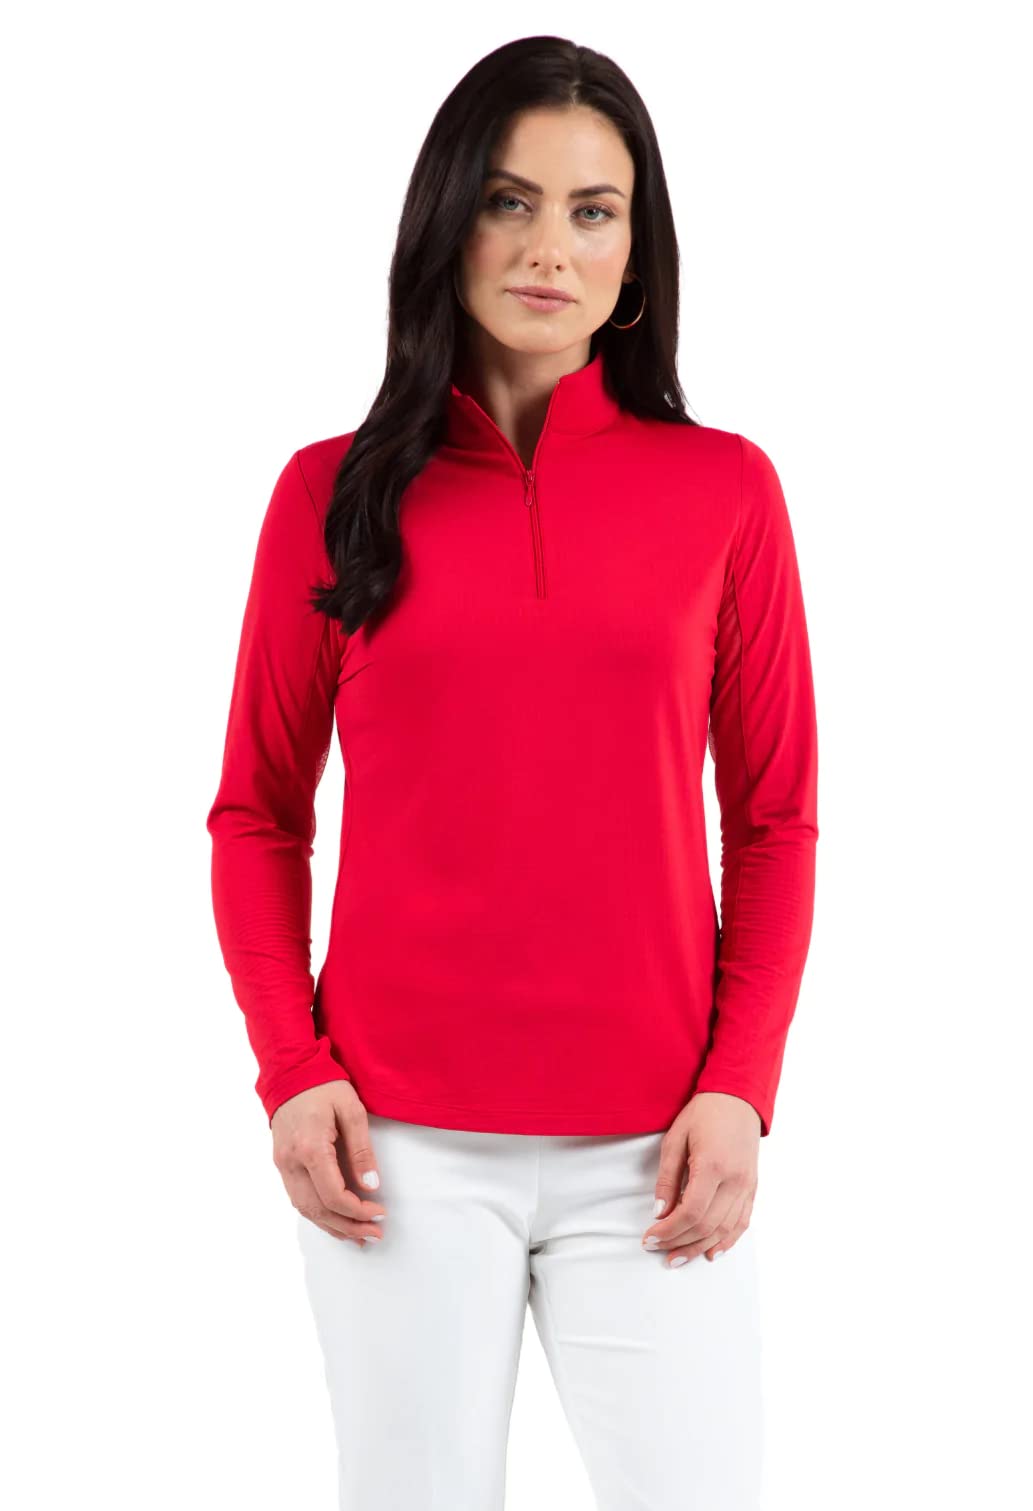 IBKUL Athleisure Wear Sun Protective UPF 50+ Icefil Cooling Tech Long Sleeve Mock Neck Top with Under Arm Mesh 80000 Red Solid M